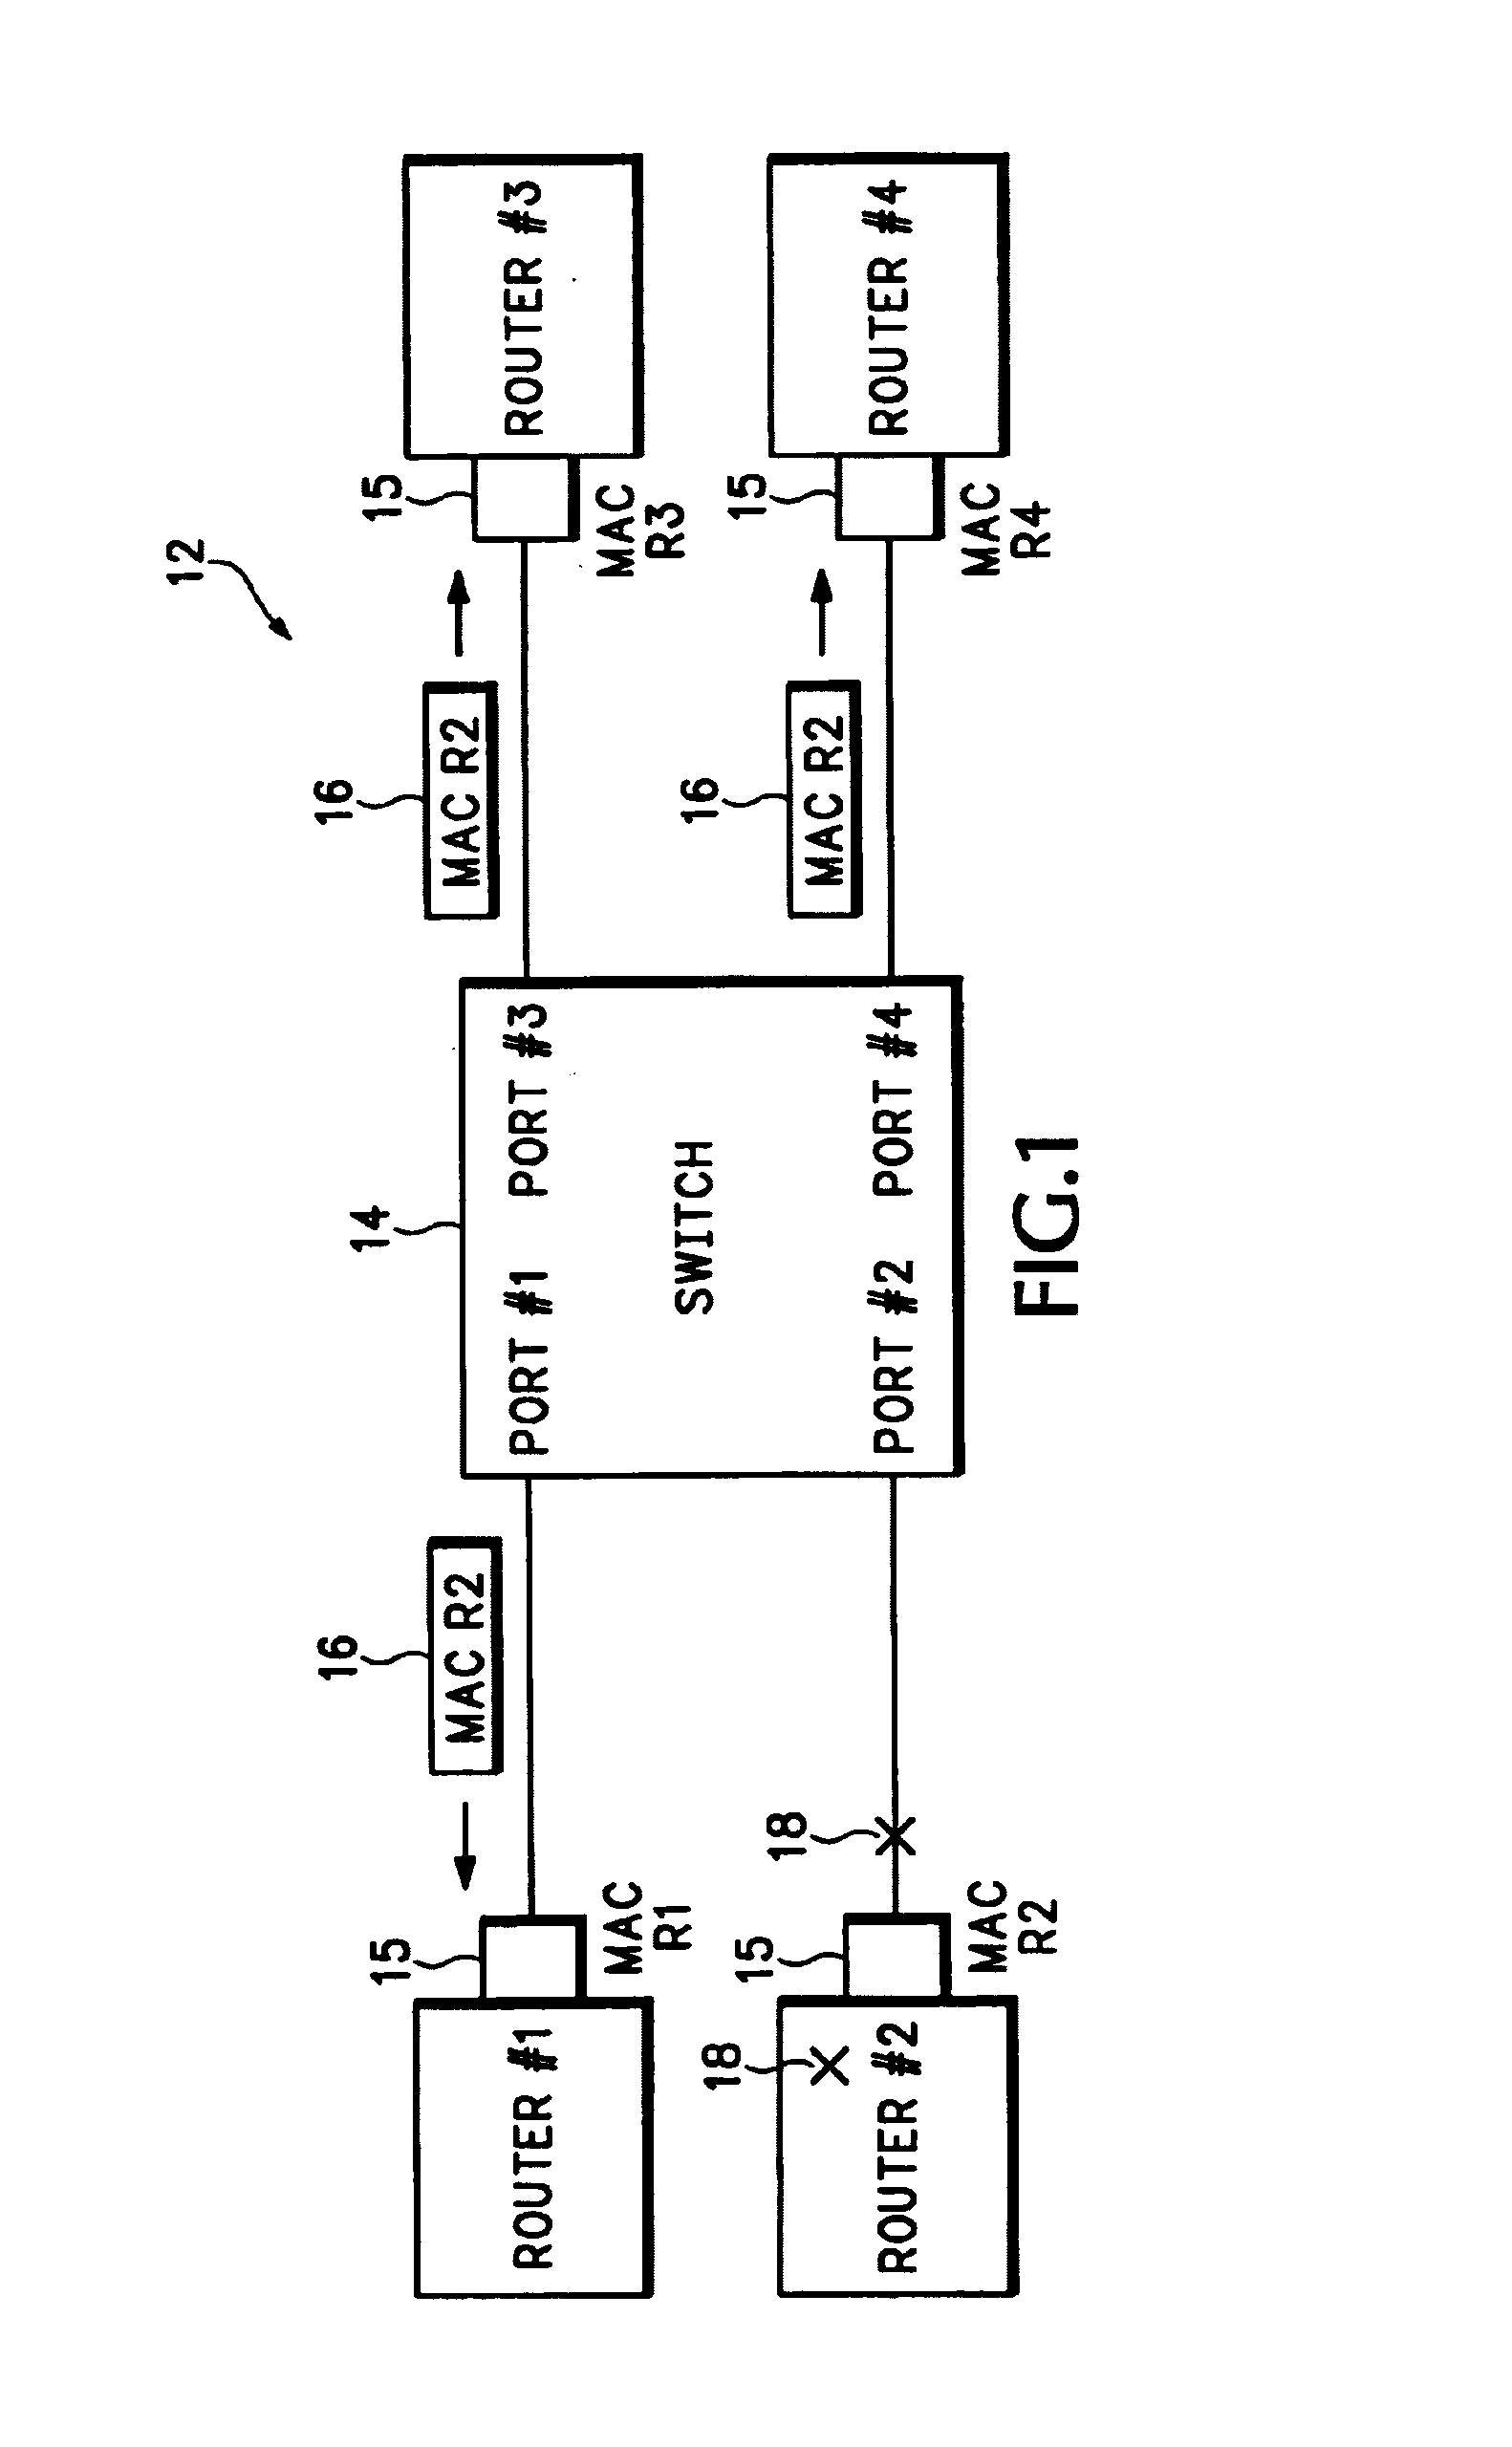 Method and apparatus for fast failure detection in switched LAN networks